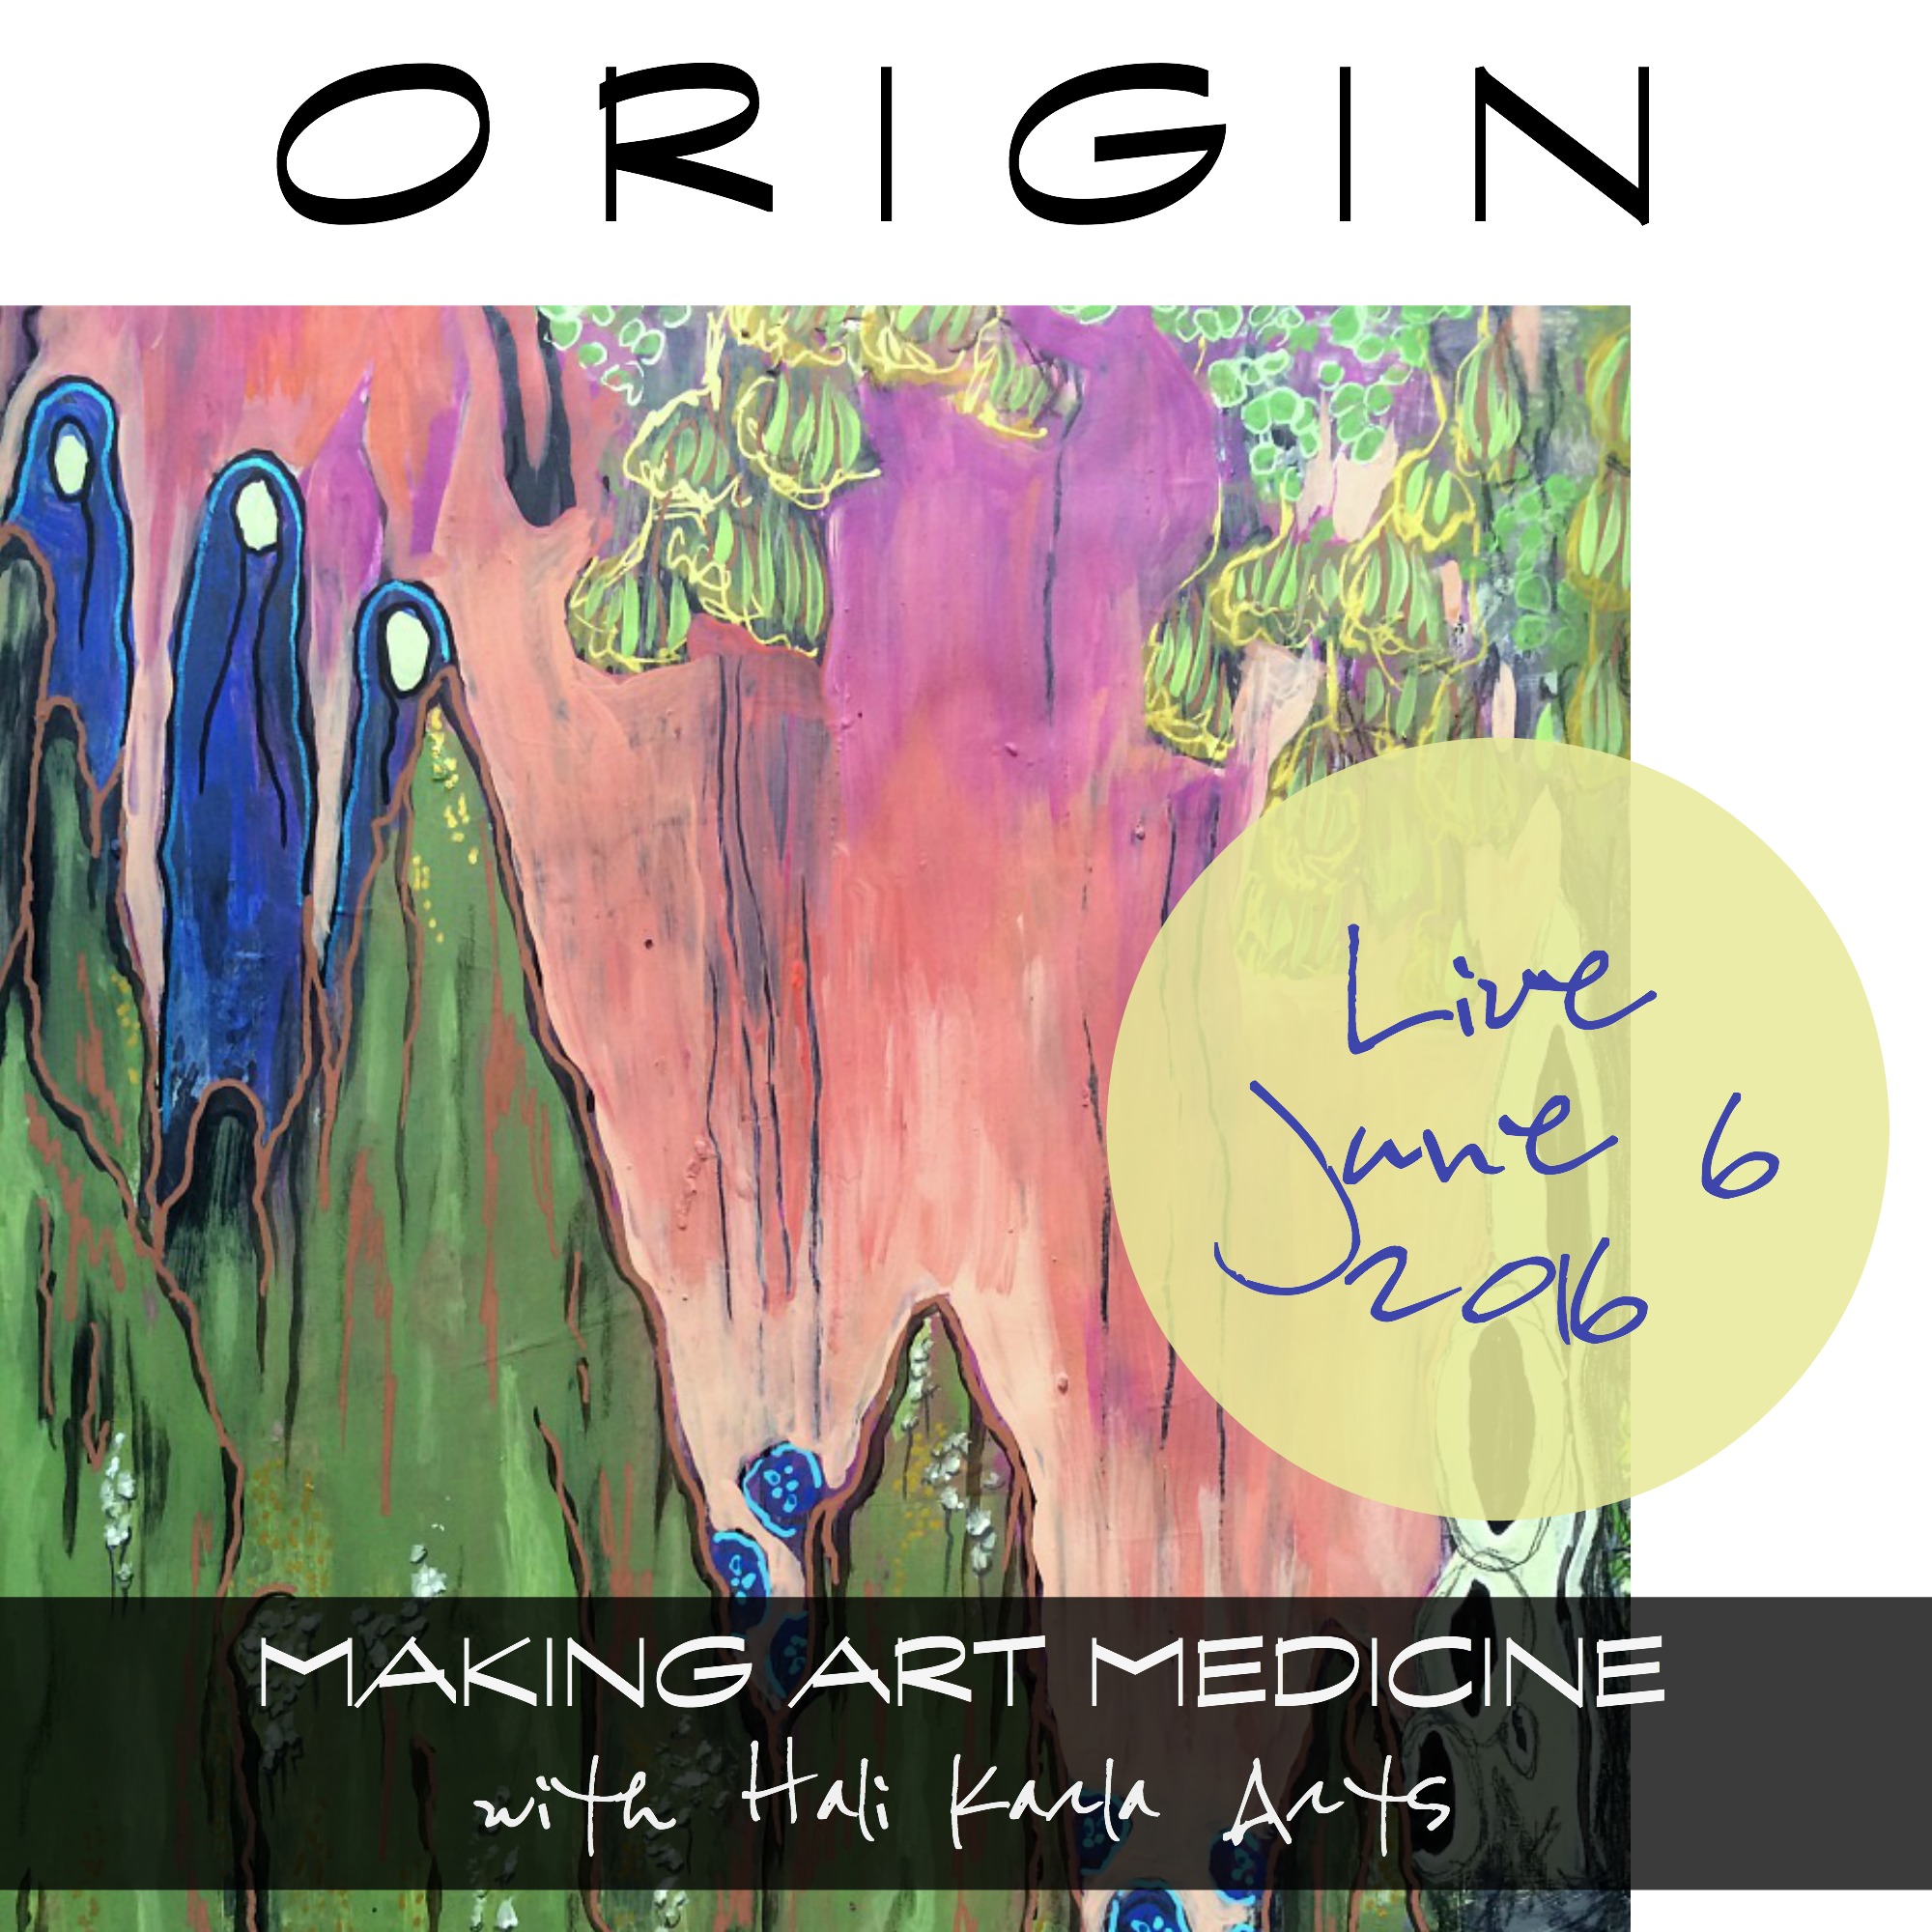 Origin - a self-paced contemplative art class about connecting with your landscape and dreamscapes begins June 6 - with Hali Karla Arts